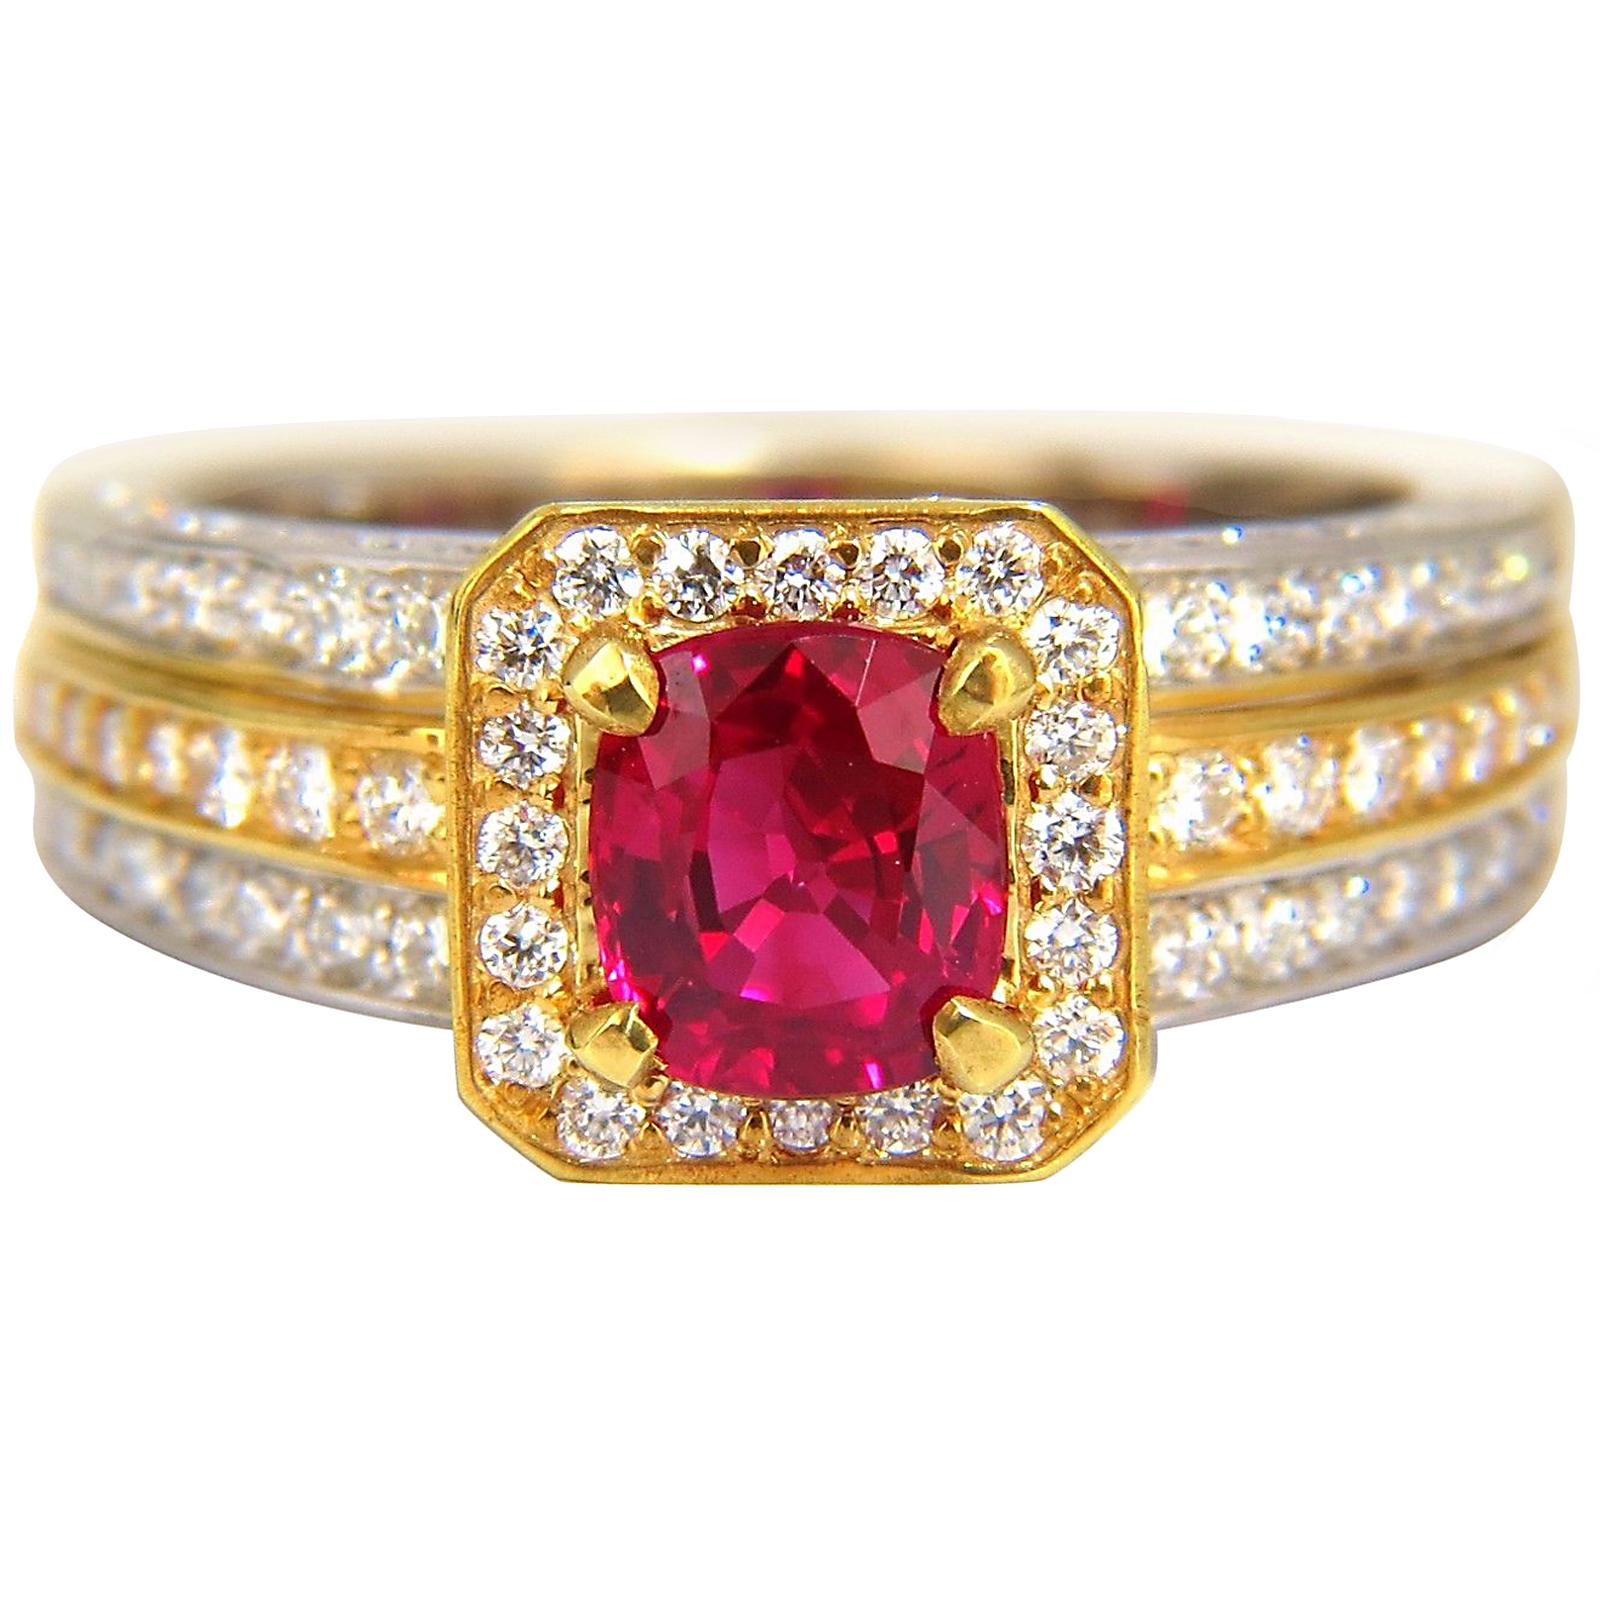 GIA Certified 2.54 Carat Vivid Red Ruby Diamonds Ring For Sale